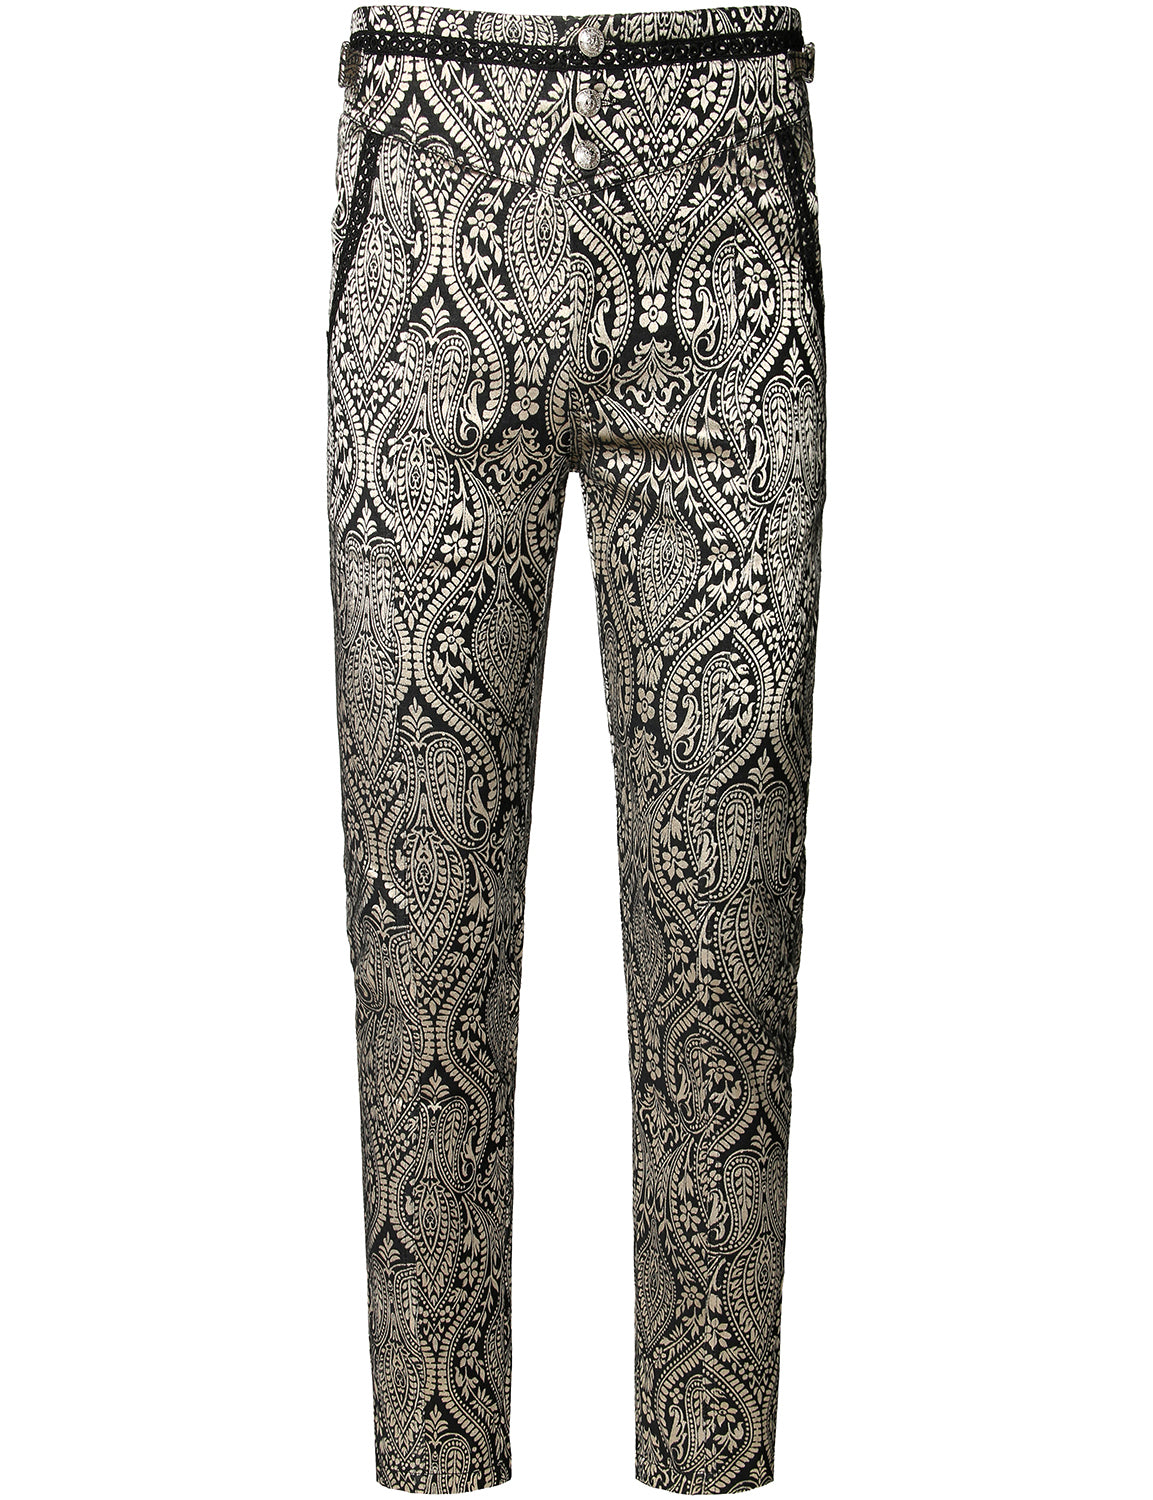 Men's Gothic Pants Cosplay Costume Trousers Steampunk Victorian Pants